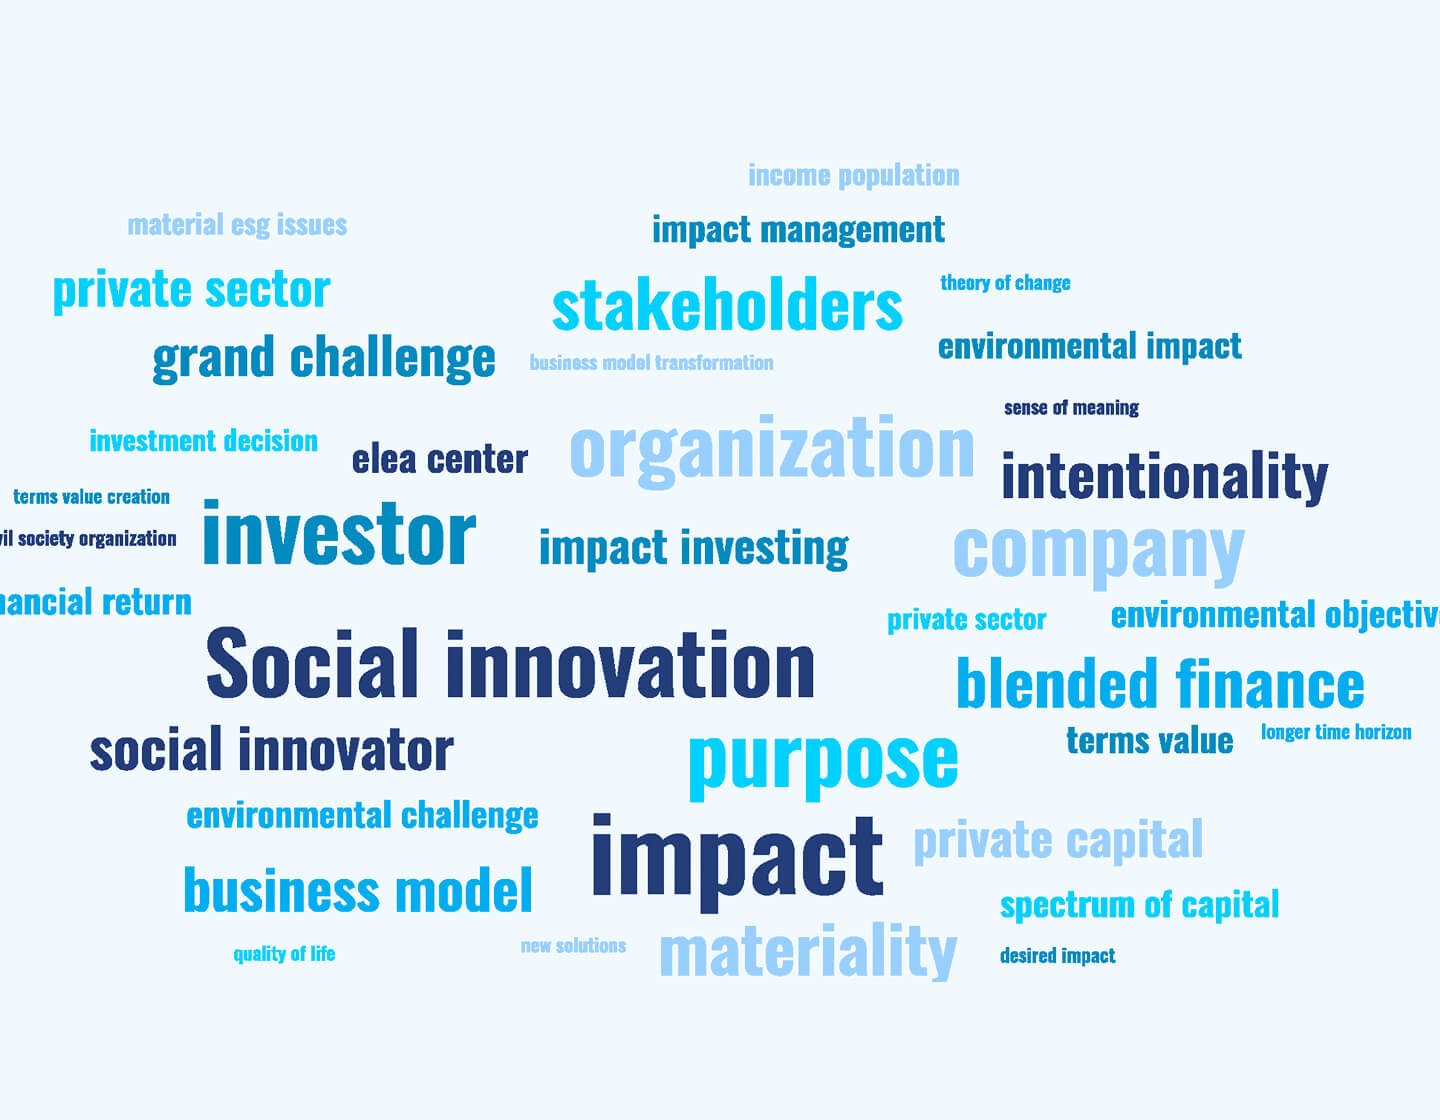 Social innovation: Mobilizing private capital for impact